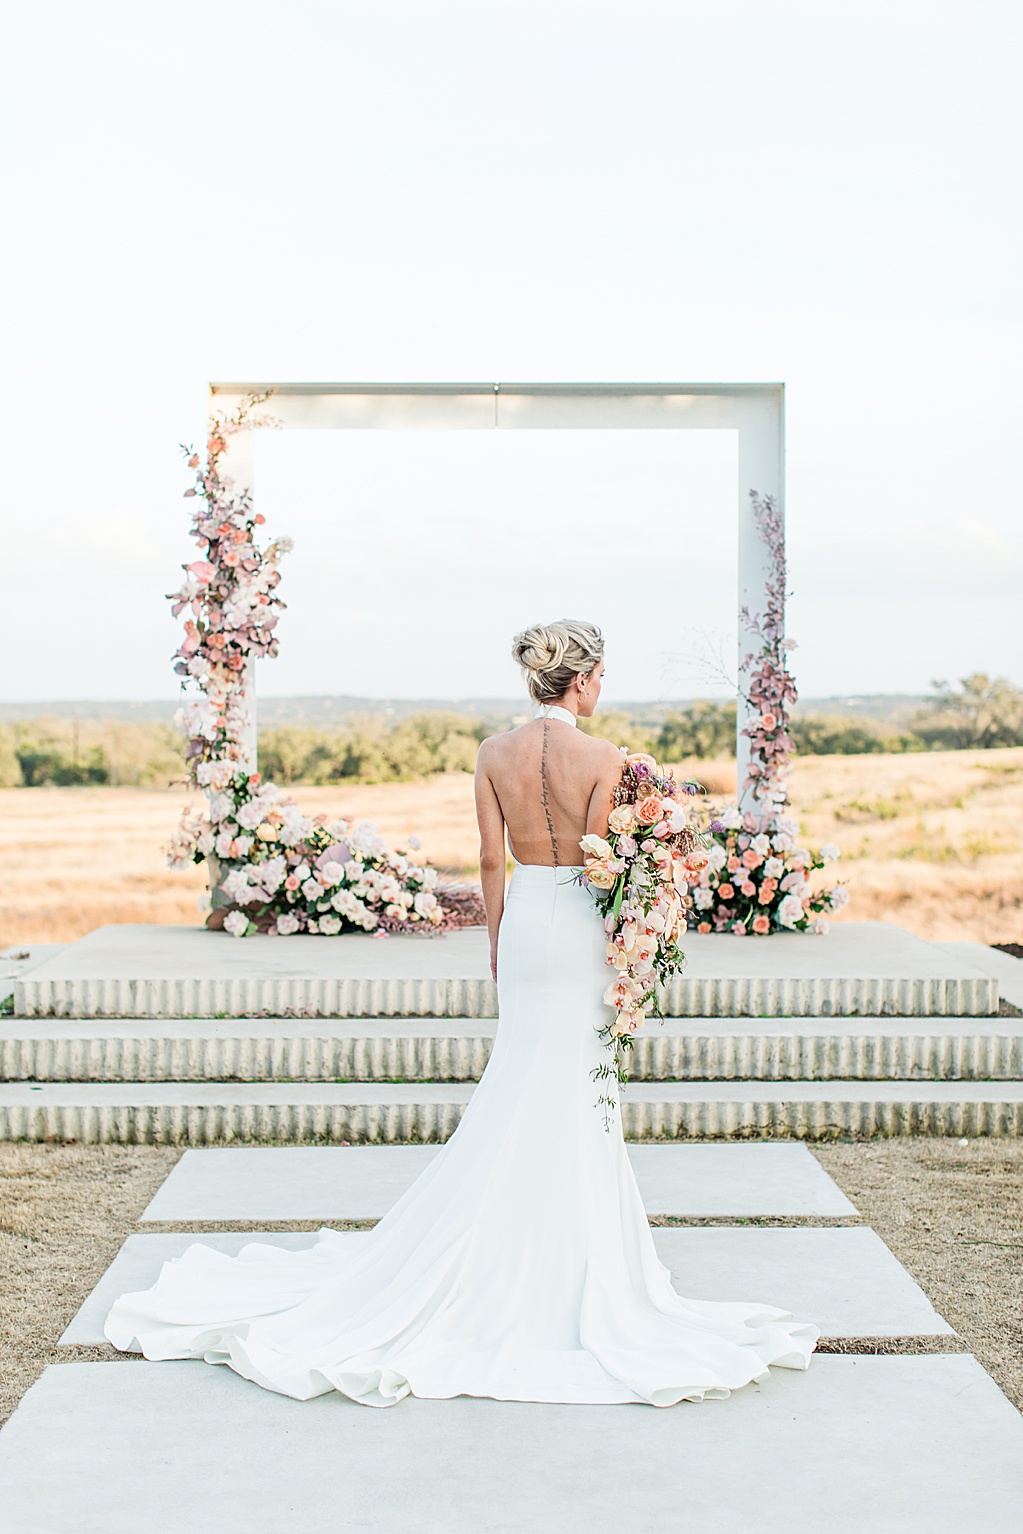 Blush mauve peach and coral wedding inspiration at Prospect House in Dripping Springs Texas wedding venue by Allison Jeffers Photography 0043